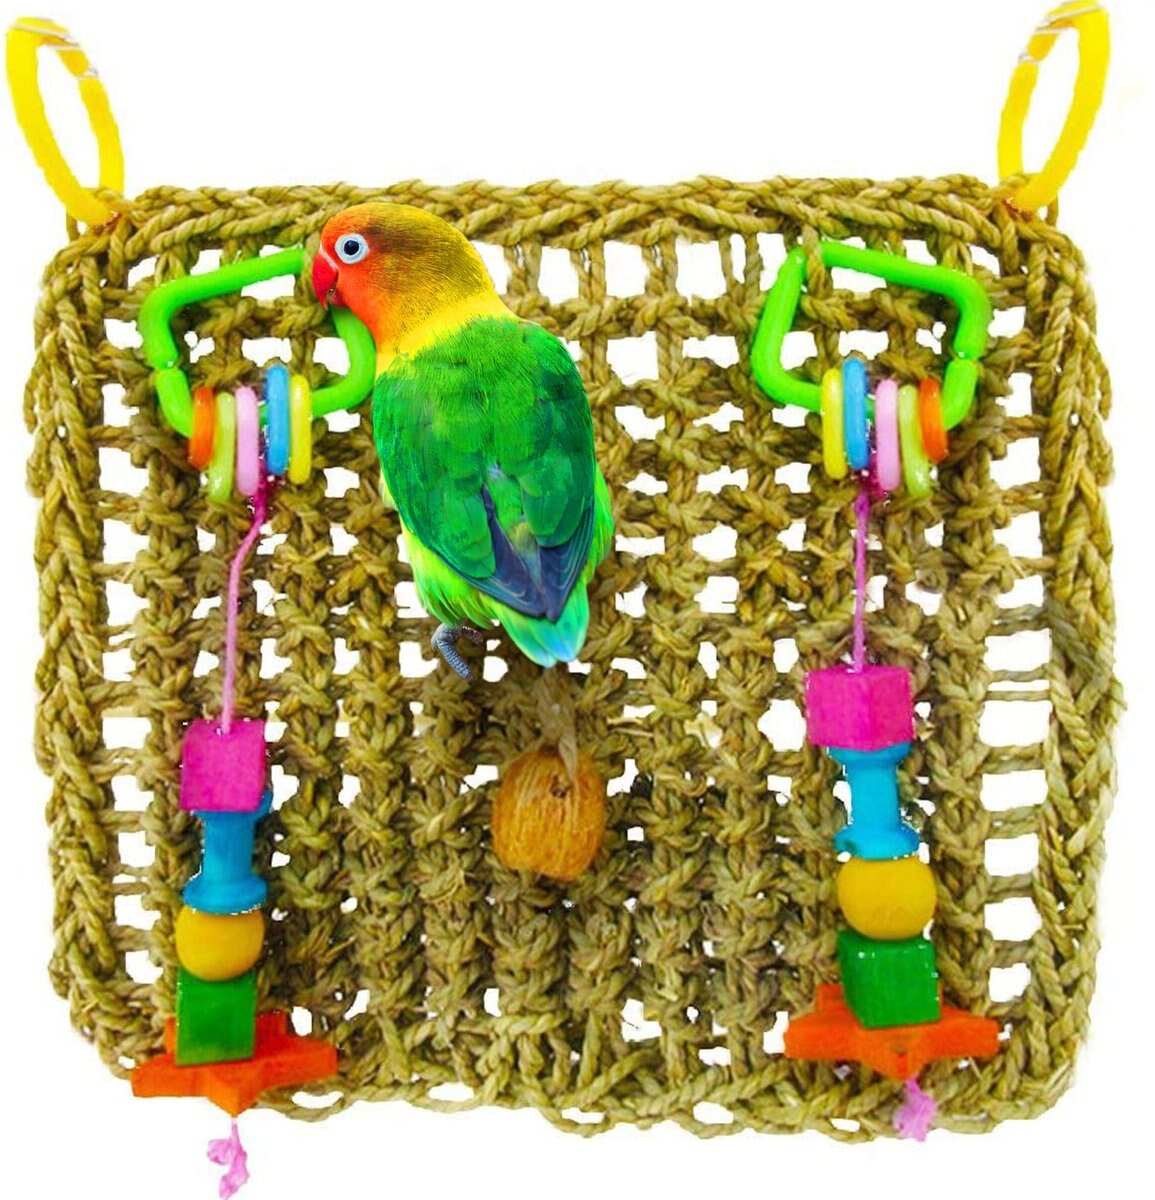 10 EXTRA LARGE NATURAL WOOD HEARTS BIRD PARROT TOY PART